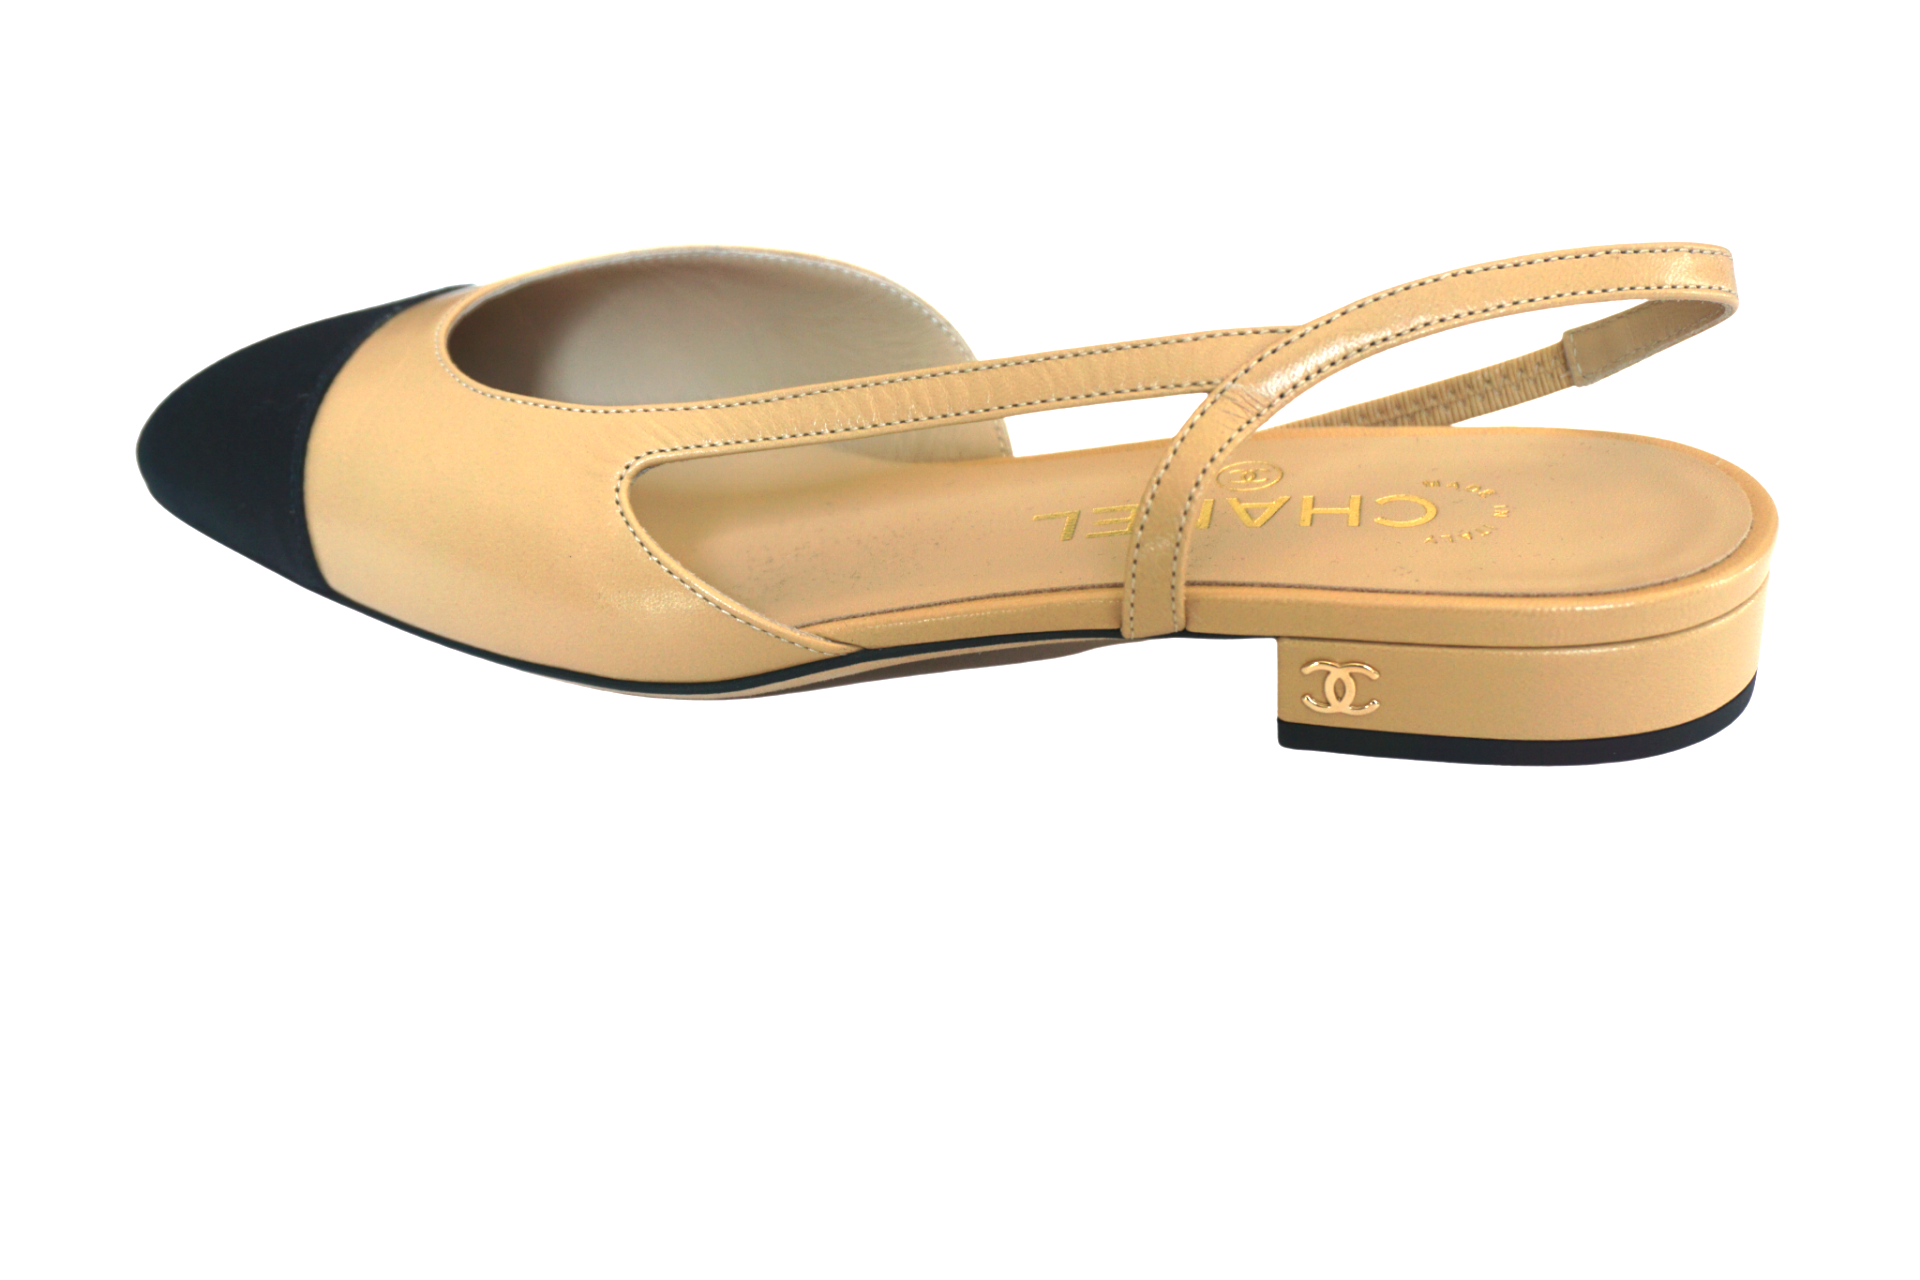 Chanel Beige/Black Fabric and Leather Cap Toe Slingback Sandals Size 36